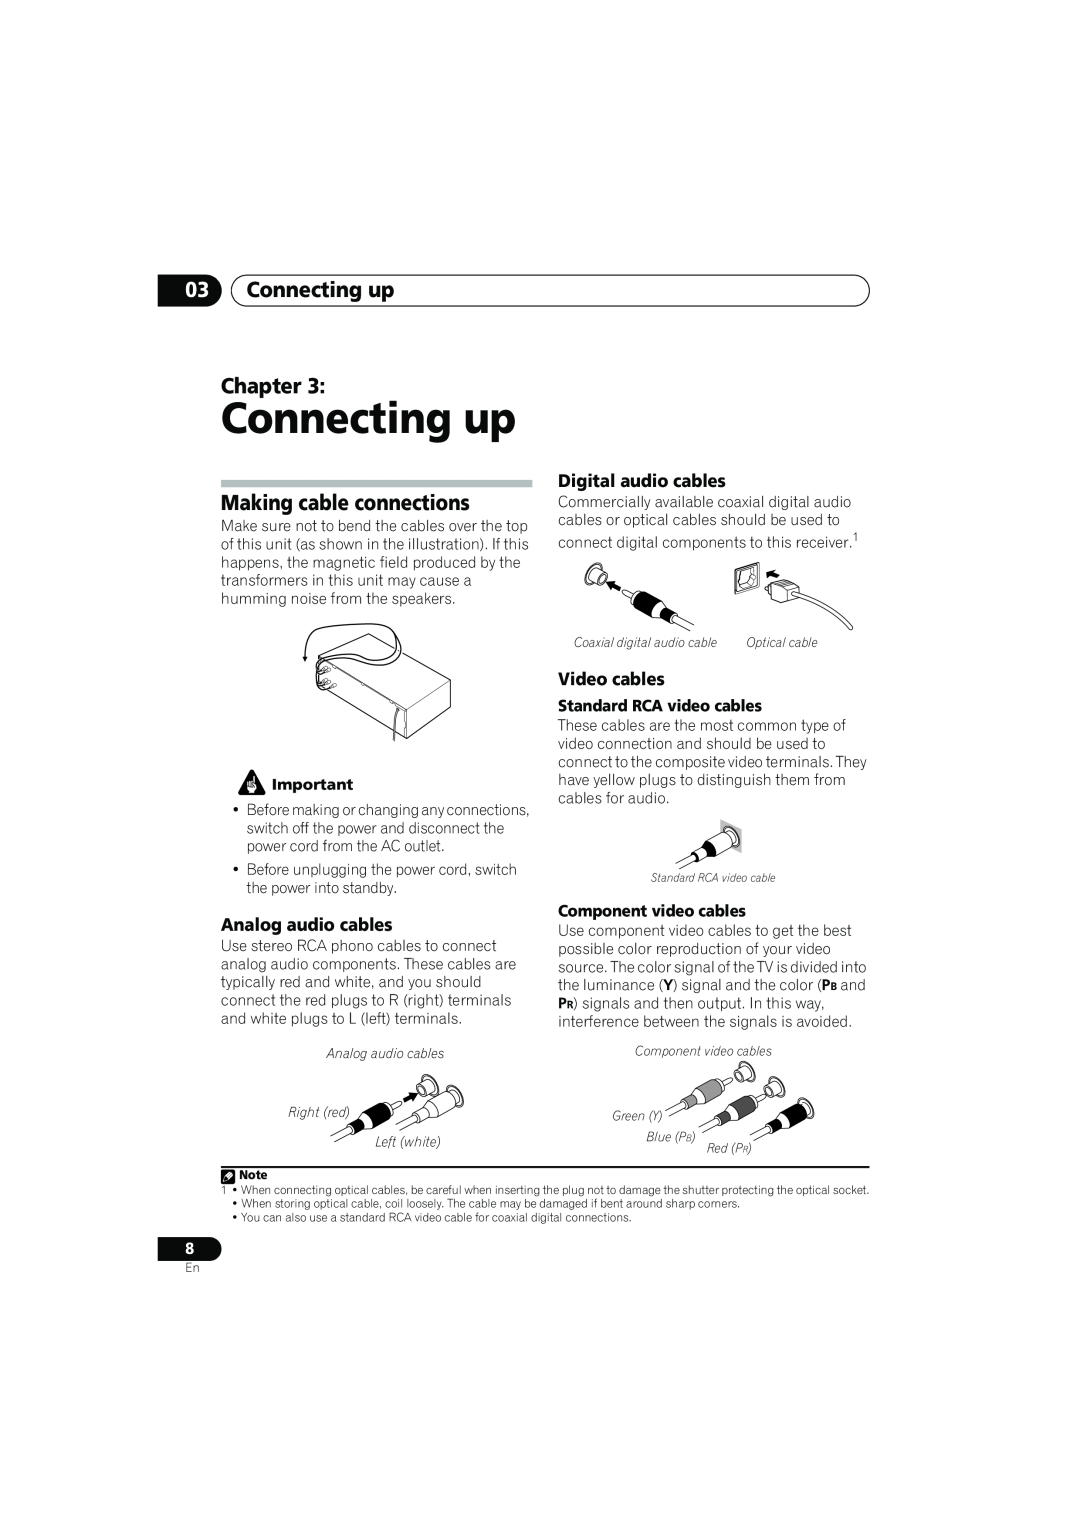 Pioneer XRE3138-A manual 03Connecting up Chapter, Making cable connections, Digital audio cables, Video cables 